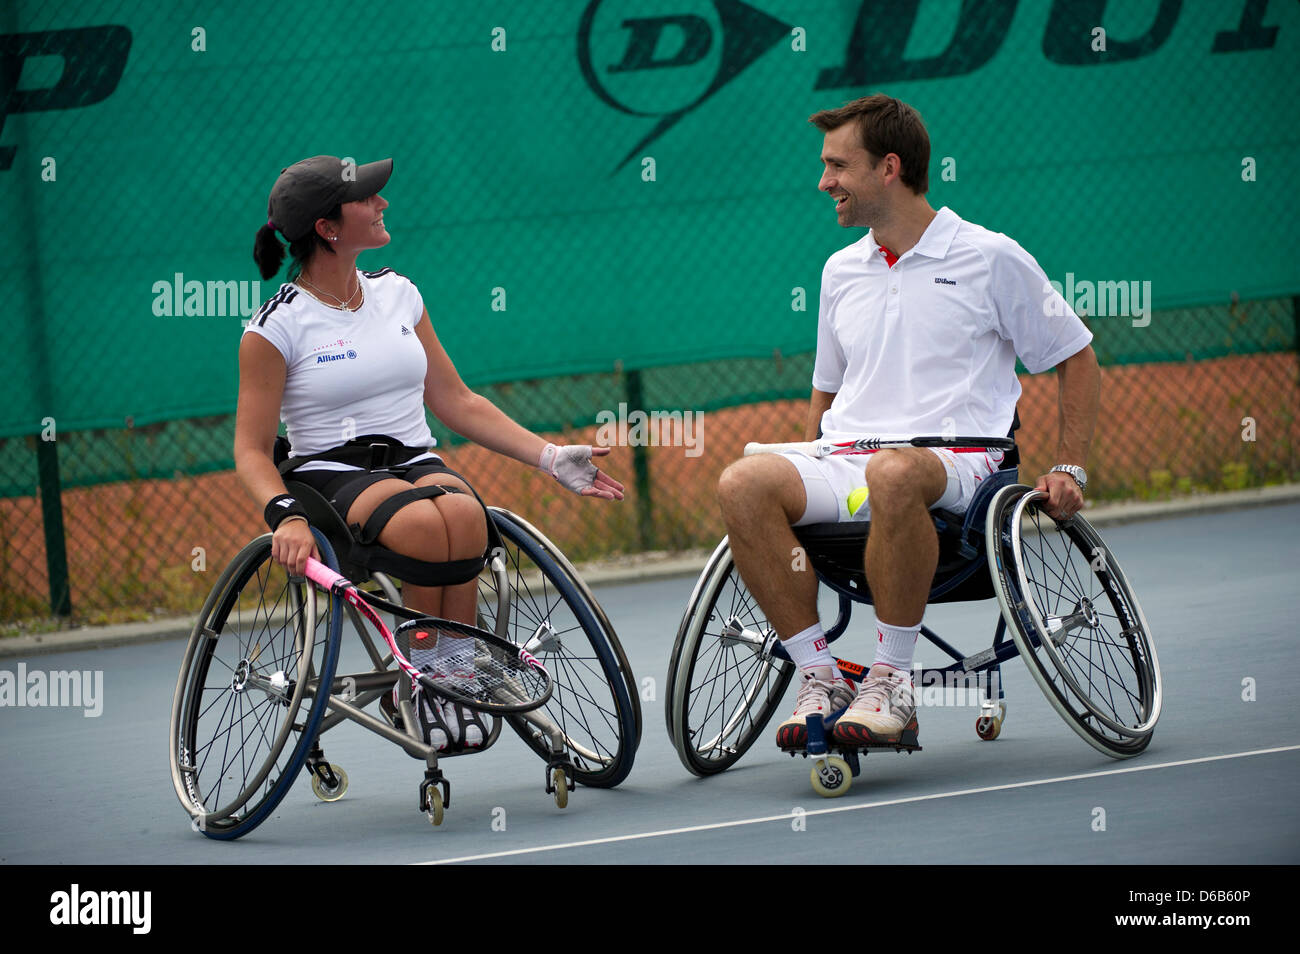 Wheelchair tennis pro Petra-Katharina Krueger jokes with fomer tennis pro Nicolas Kiefer at TennisBase in Hanover, Germany, 20 August 2012. 22-year-old Ms Krueger will compete in this year's Paralympics, which take place from 29 August to 9 September in London, Great Britain. Photo: EMILY WABITSCH Stock Photo